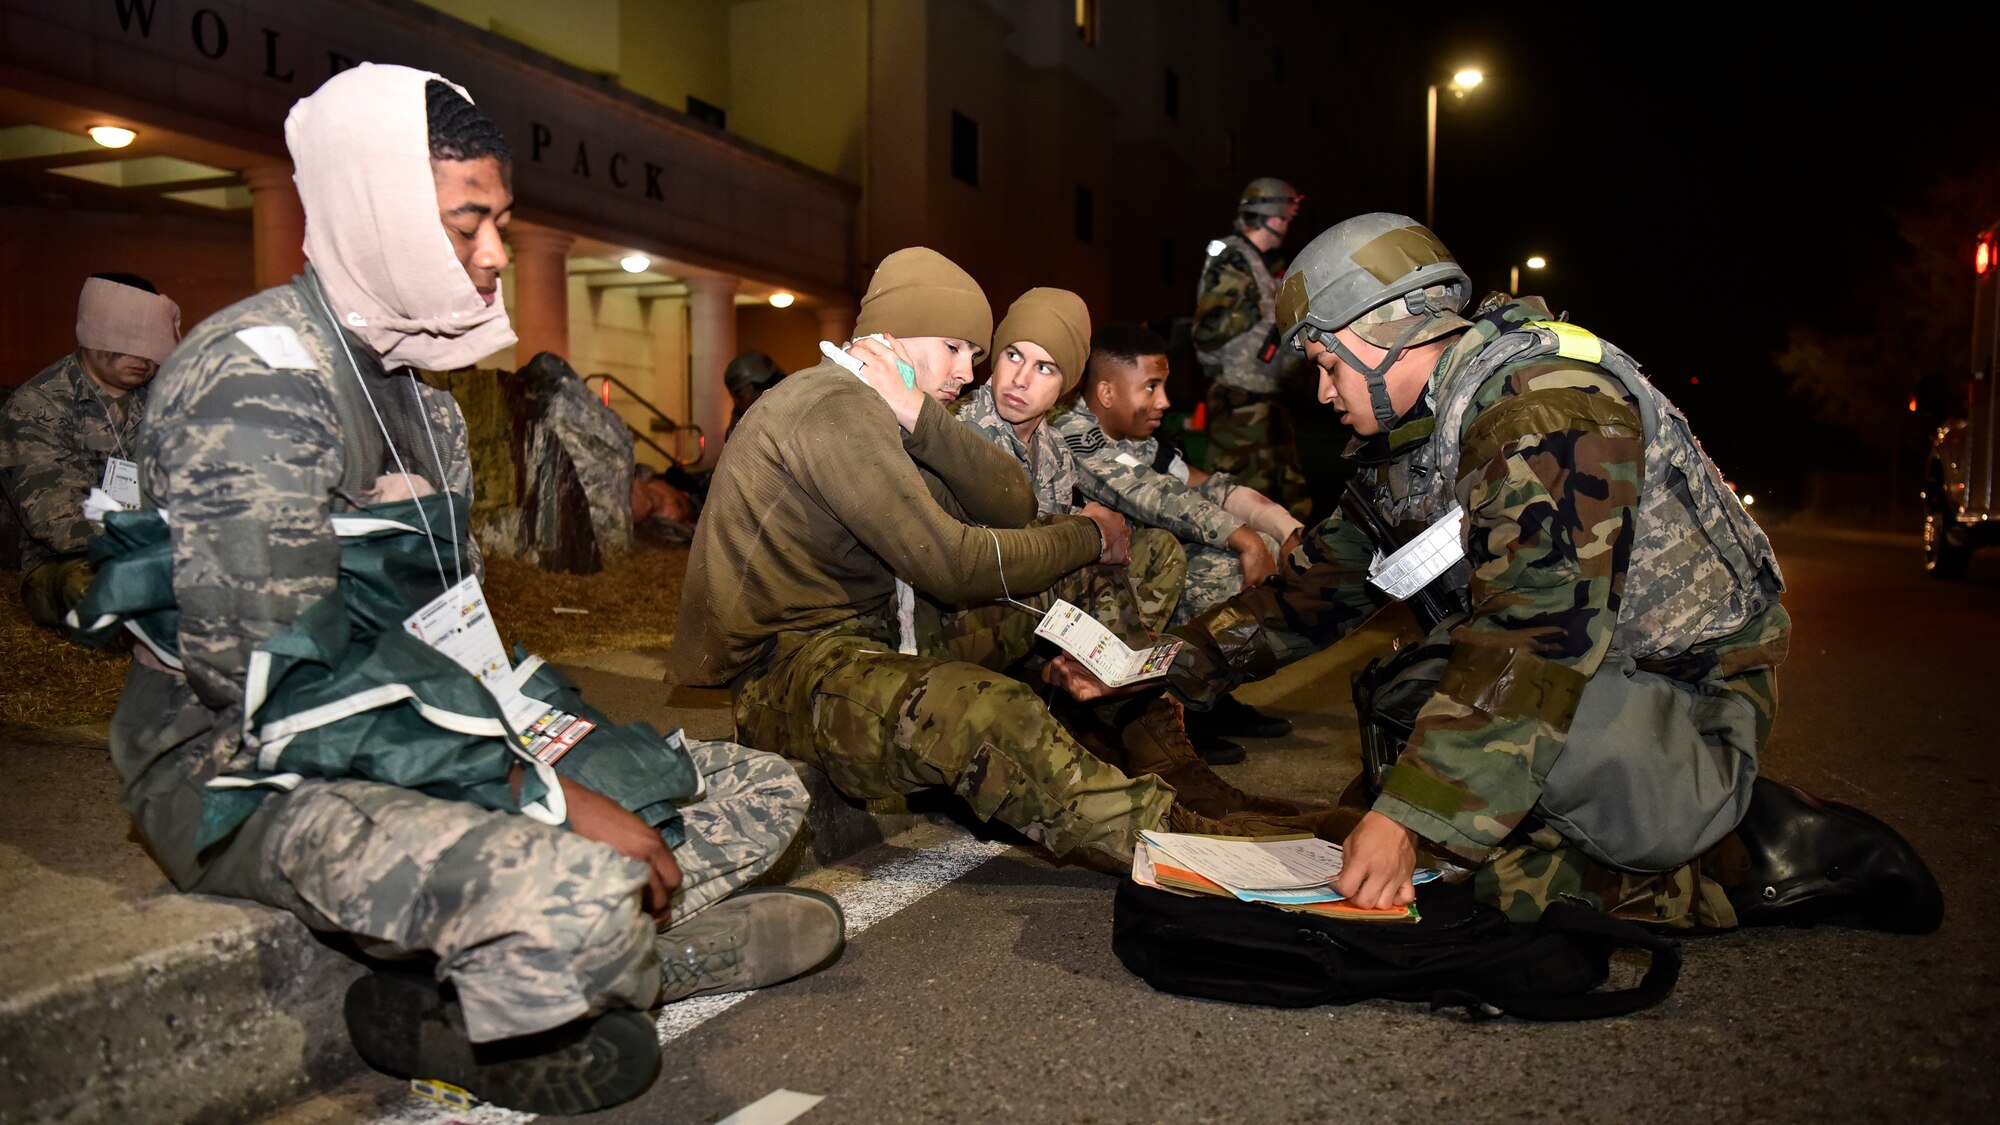 An Airman assessing simulated victims.